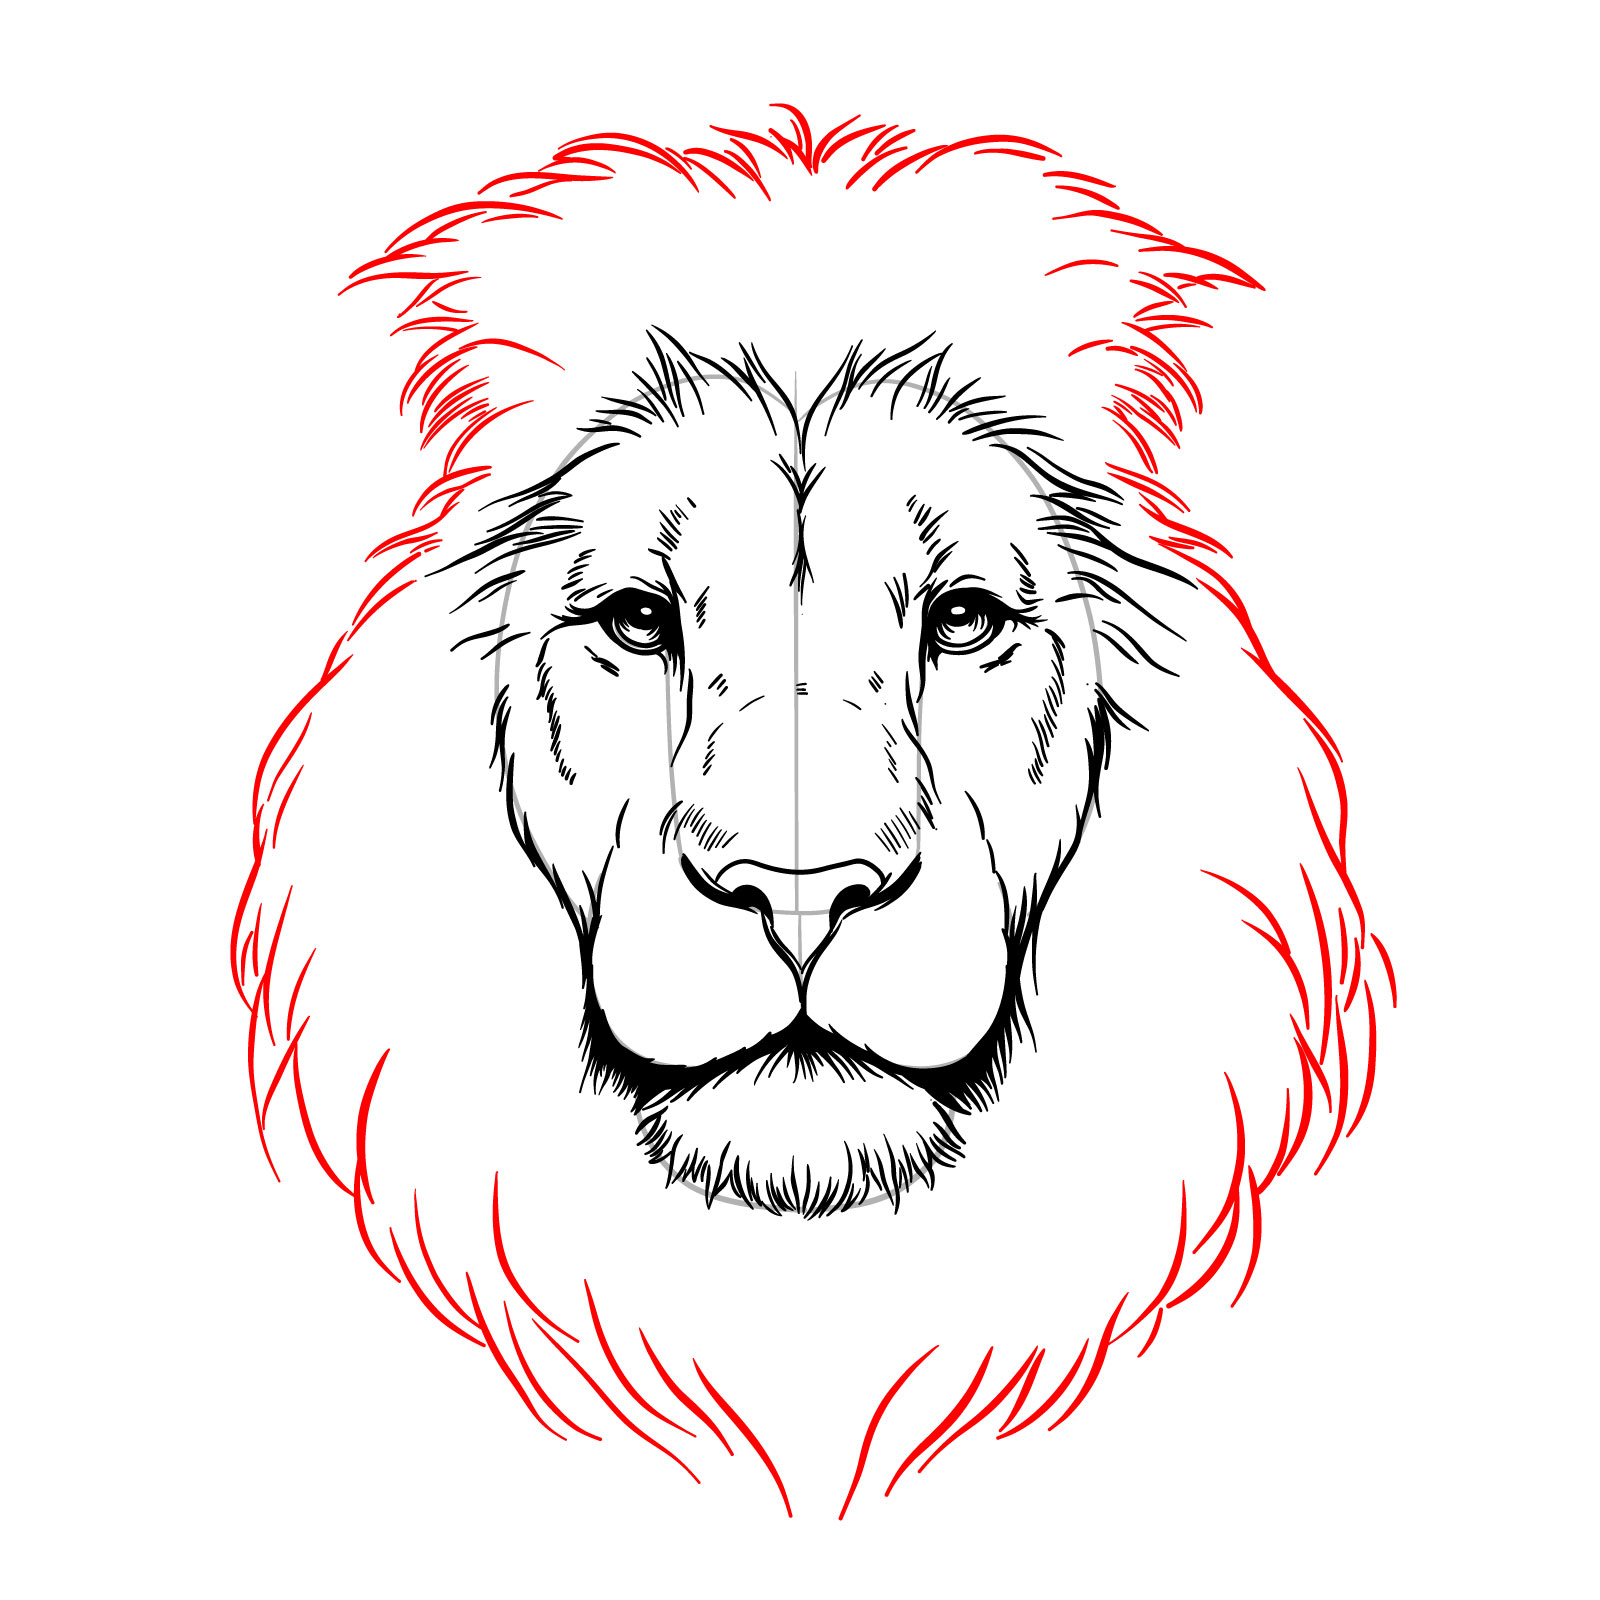 Sketching the main mane shape in a lion's face front view drawing - step 10